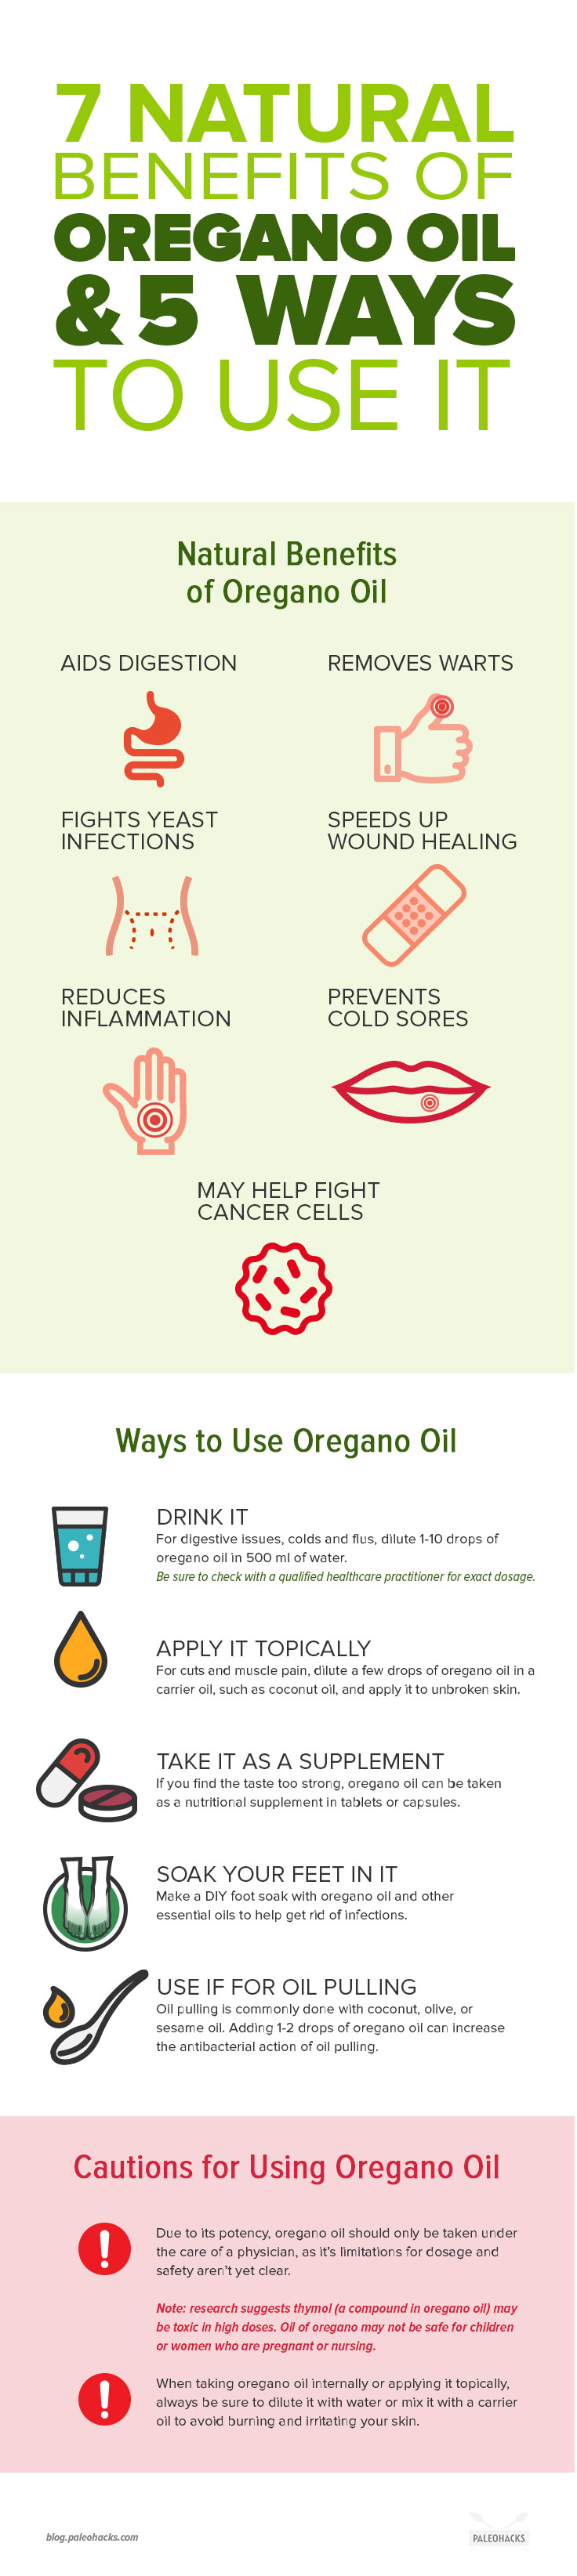 Oregano oil is one of Nature’s most powerful herbs, with a long list of healing properties that help relieve dozens of ailments.